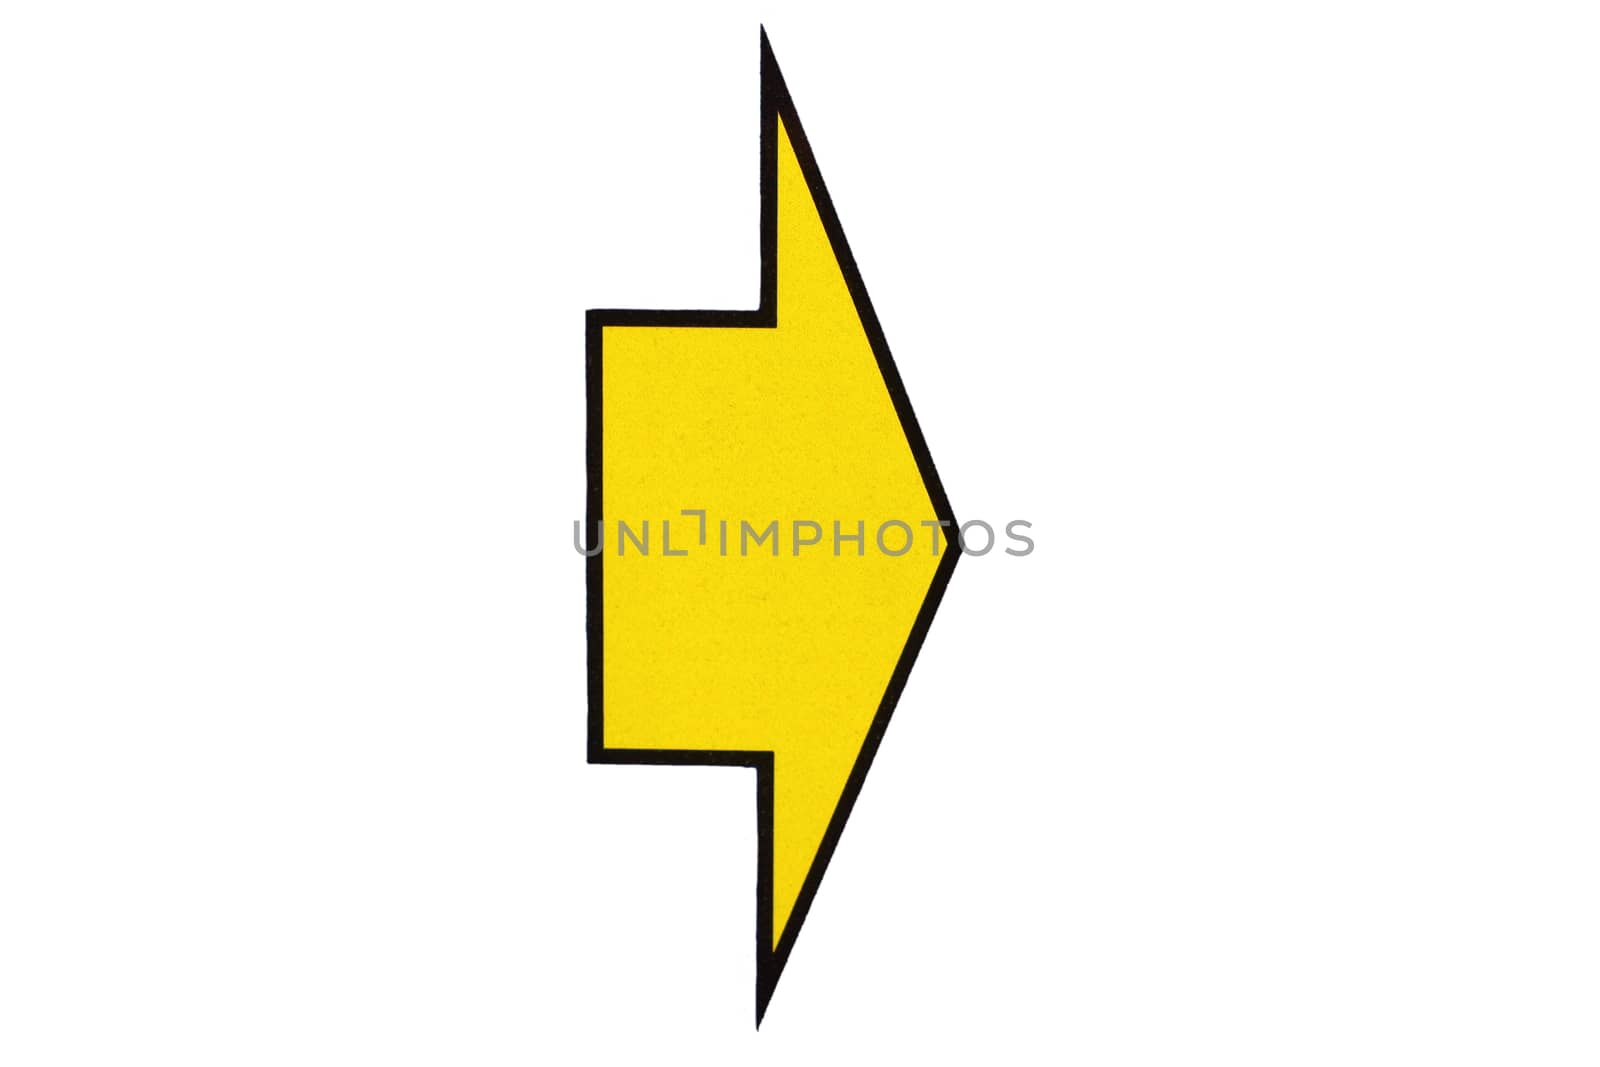 On a white background is shown in yellow pointer